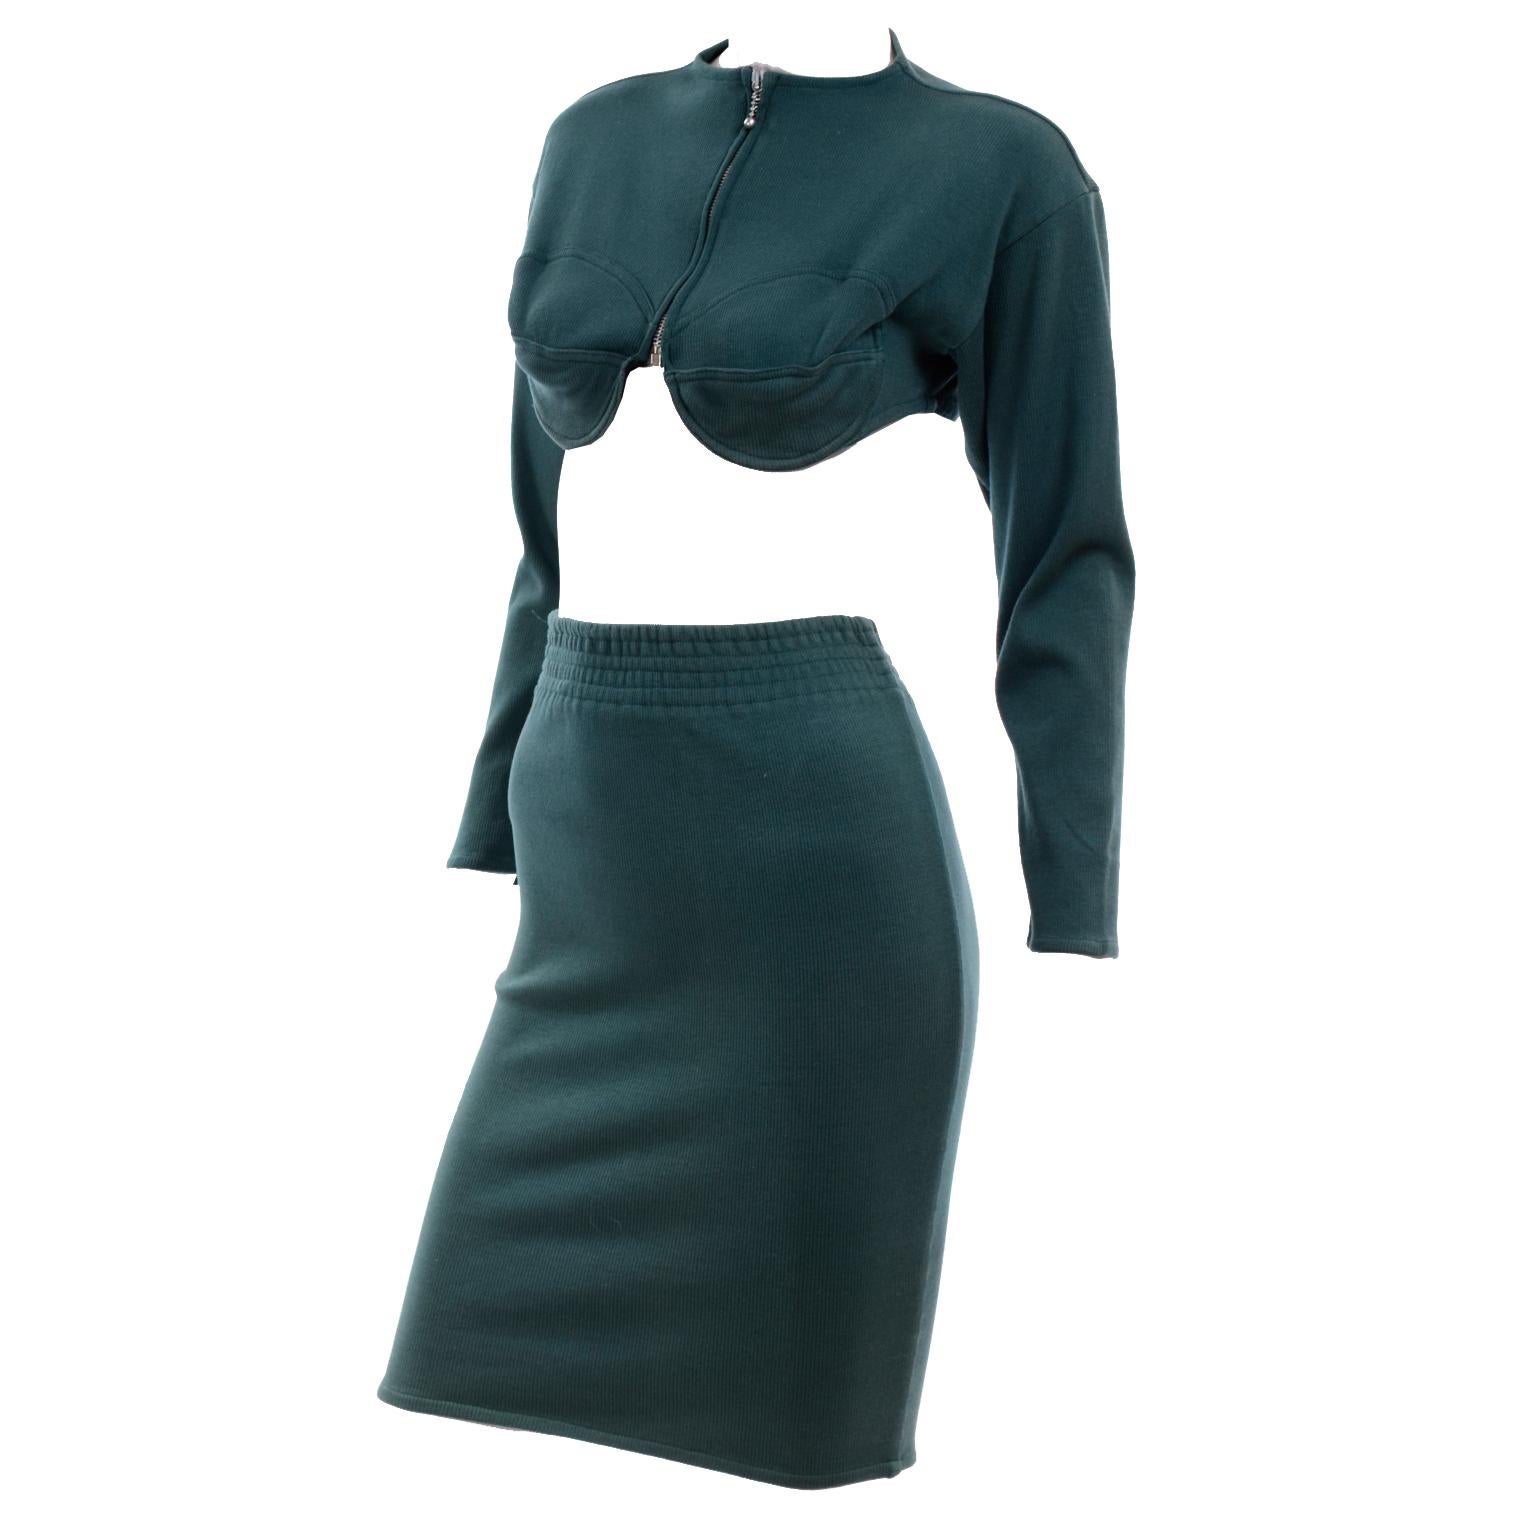 1980s Jean Paul Gaultier Vintage Cone Bust Cropped Top & Skirt 2 pc Green Dress 2